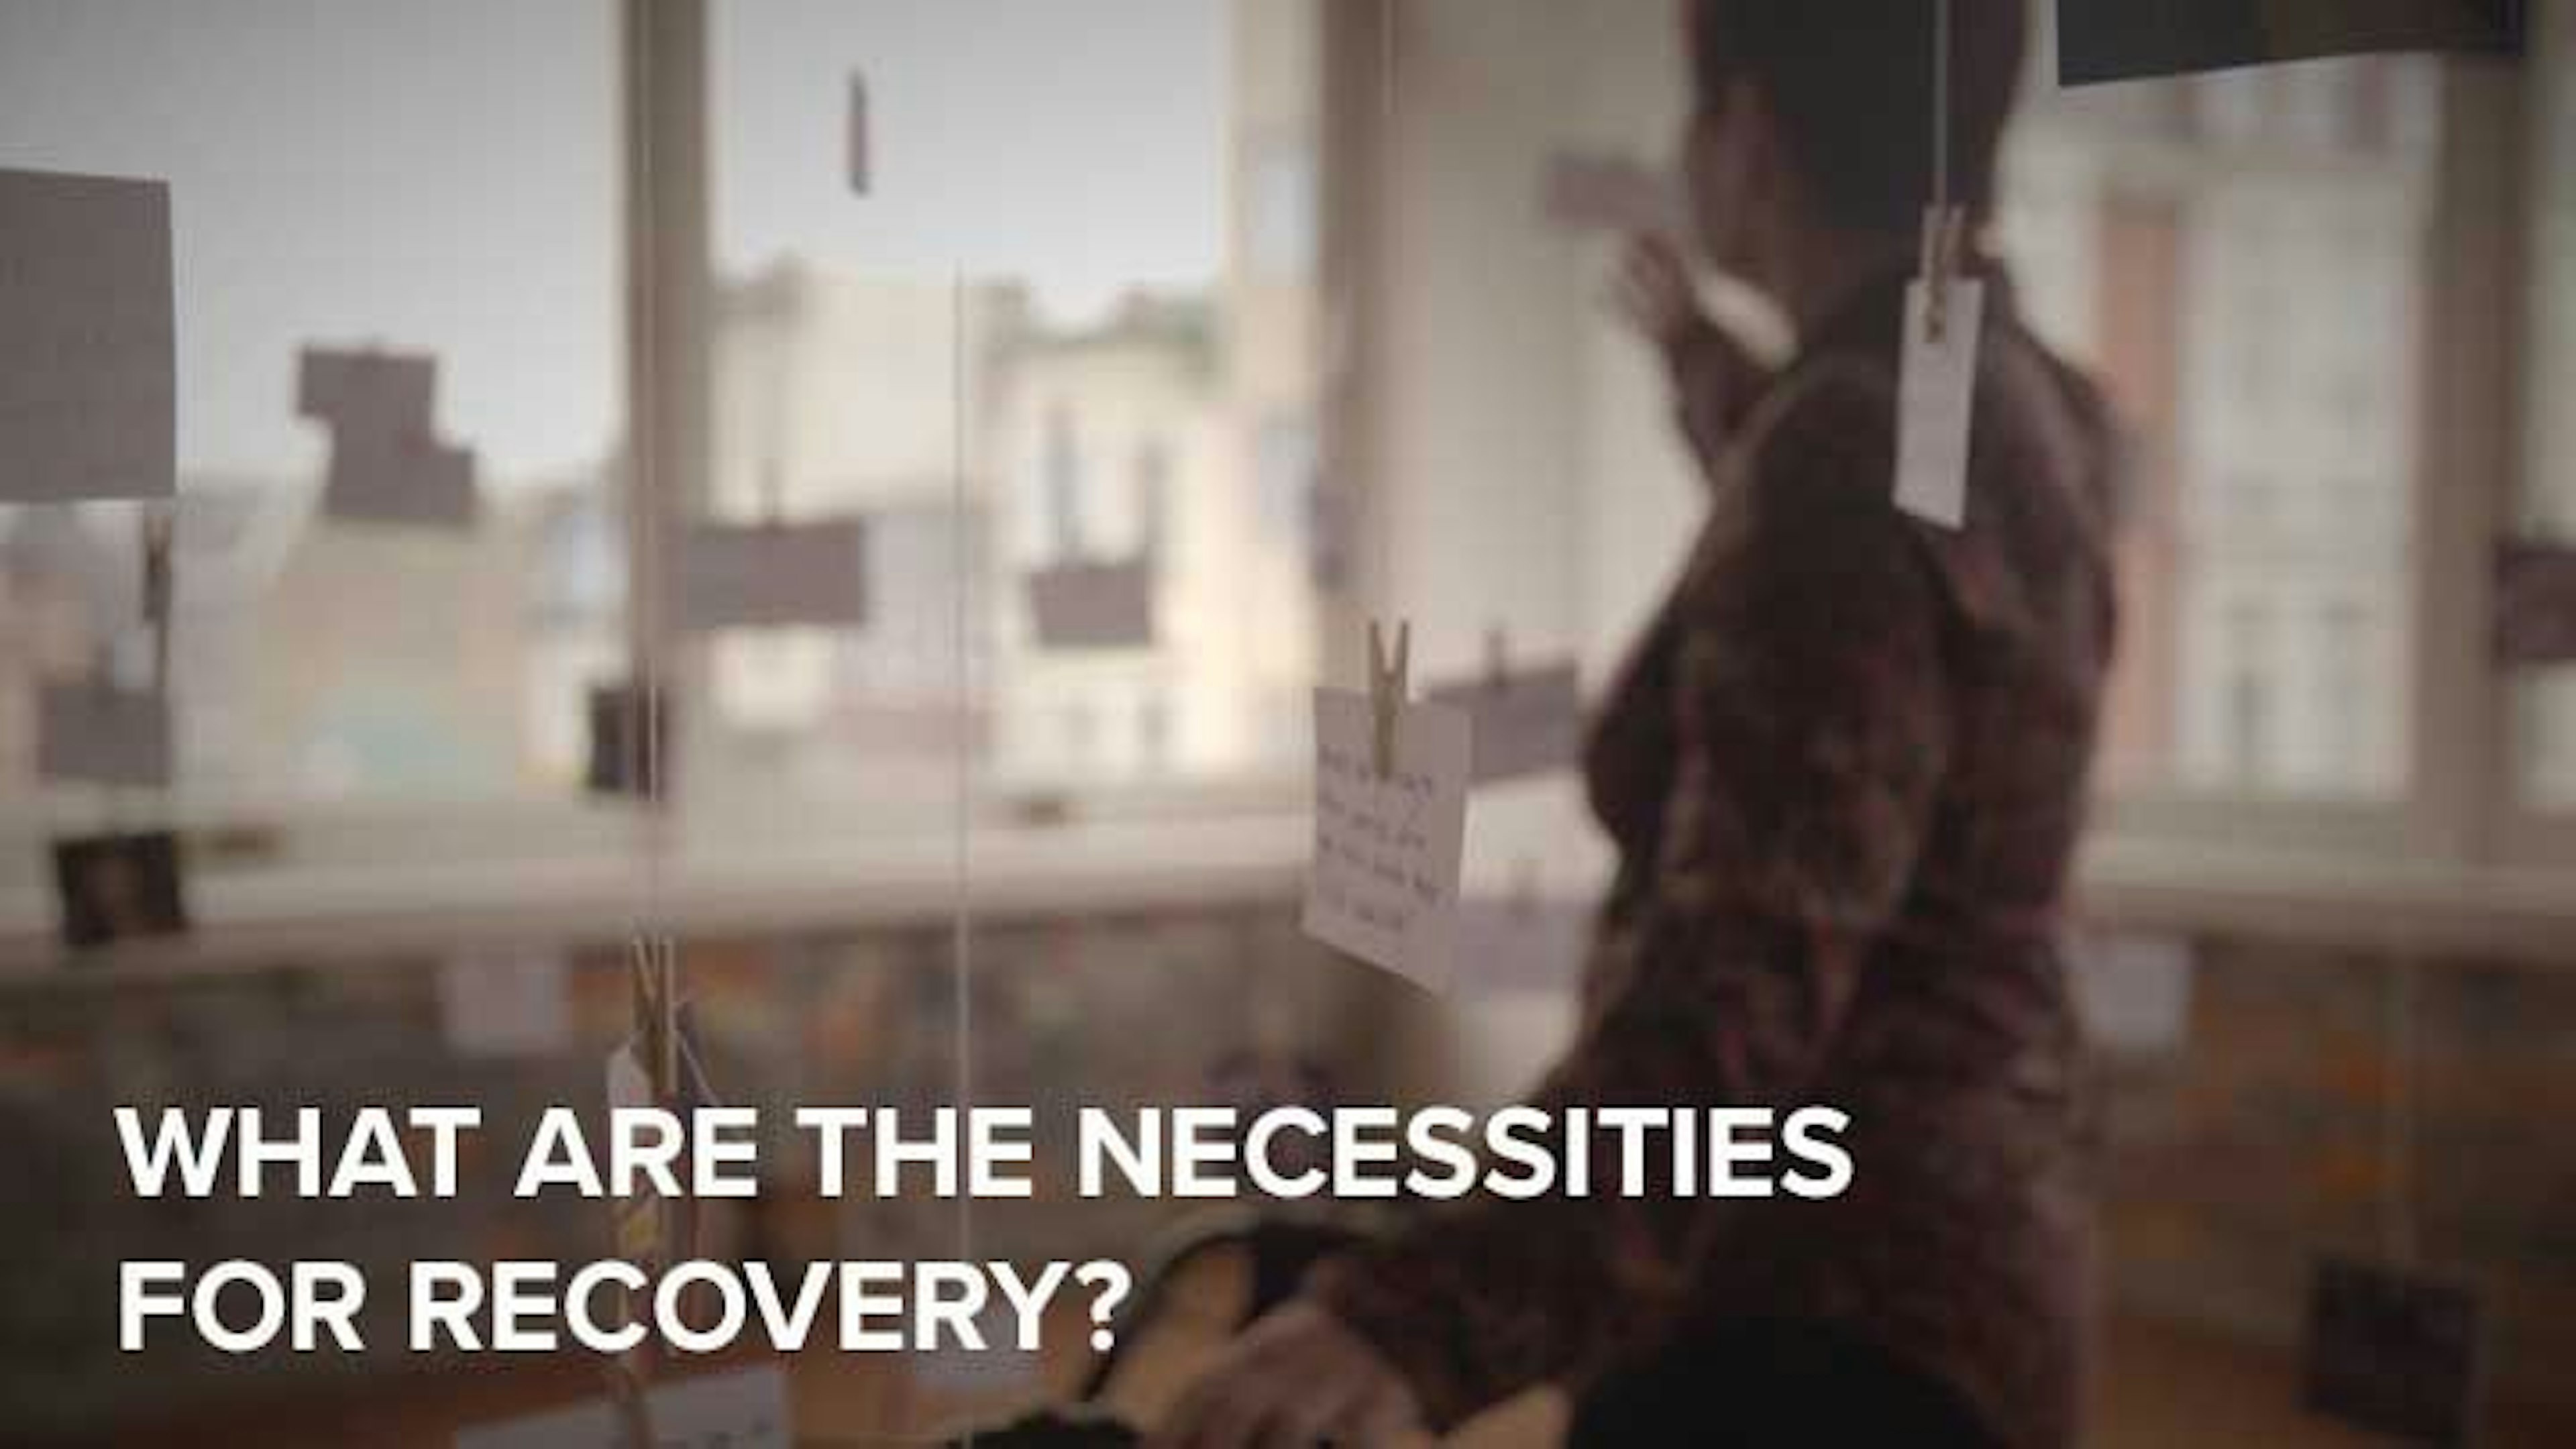 What are the necessities for recovery?